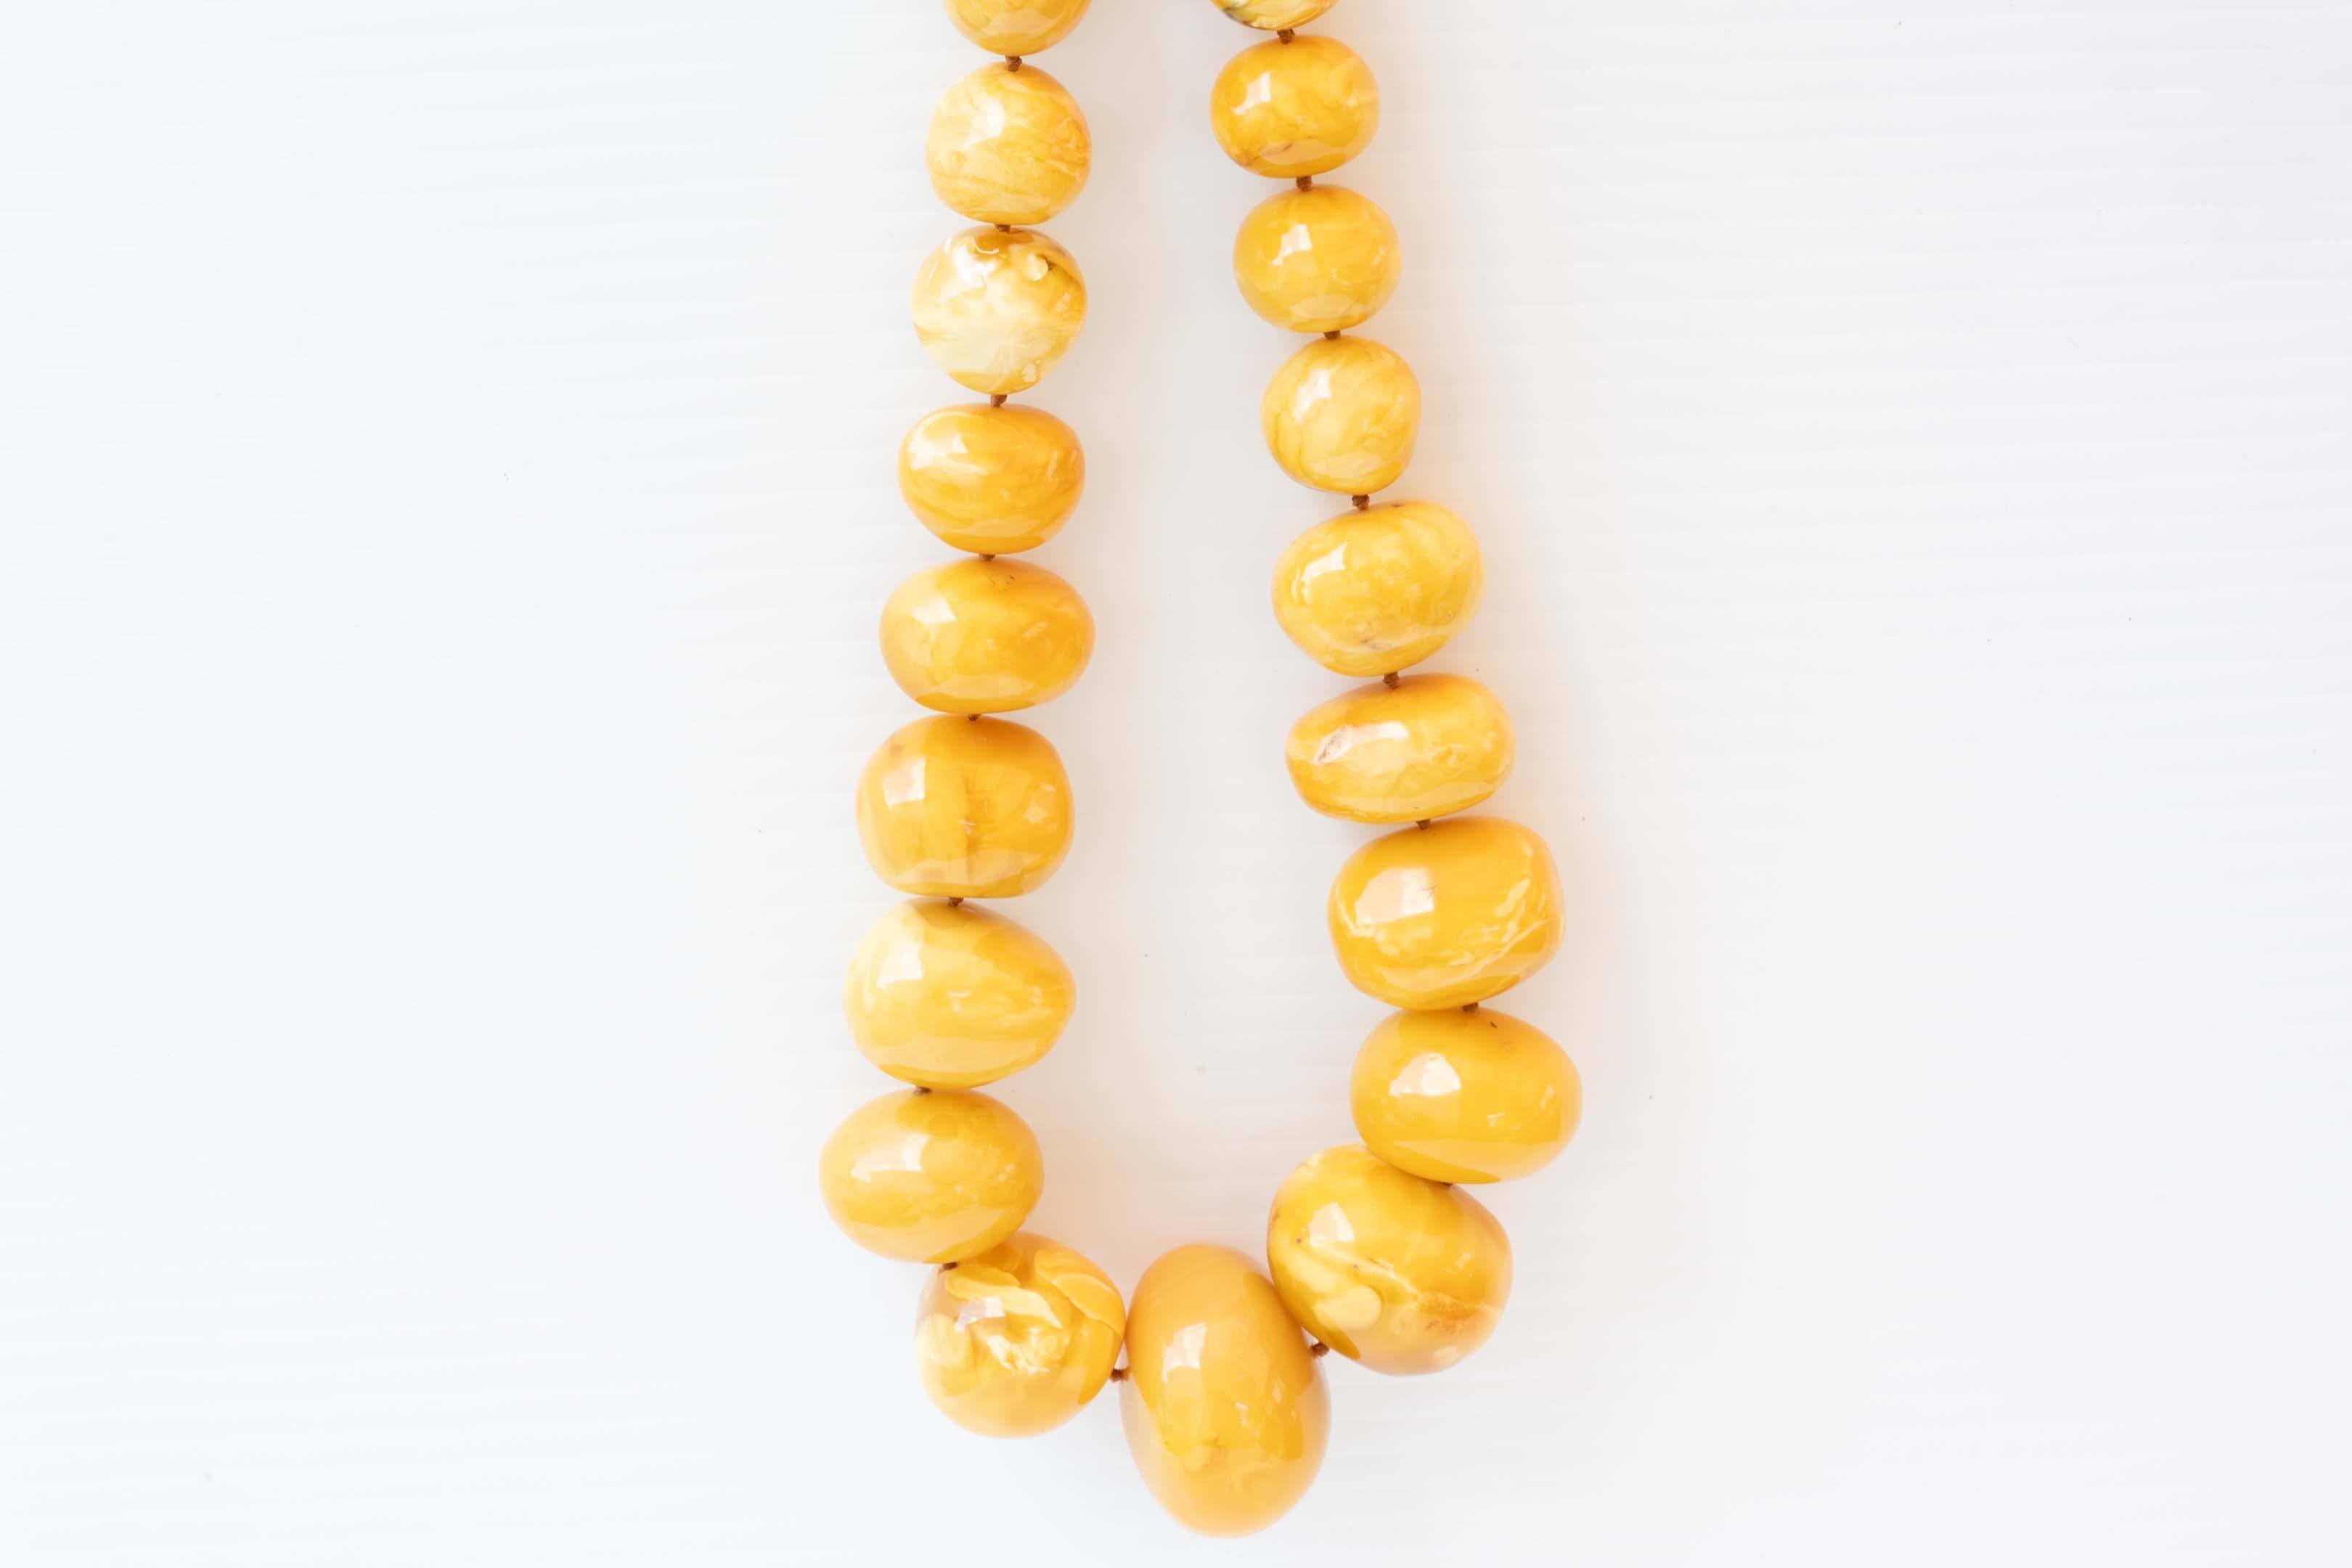 Rare colossal-sized baltic amber in an exceptional egg yolk colour. Measures 26 inches long, made of 31 beads from 14.5mm in diameter to 42mm, not perfectly round, for a total weight of 237 grams. The biggest beads measure 42 x 29mm and 37 x 28.5